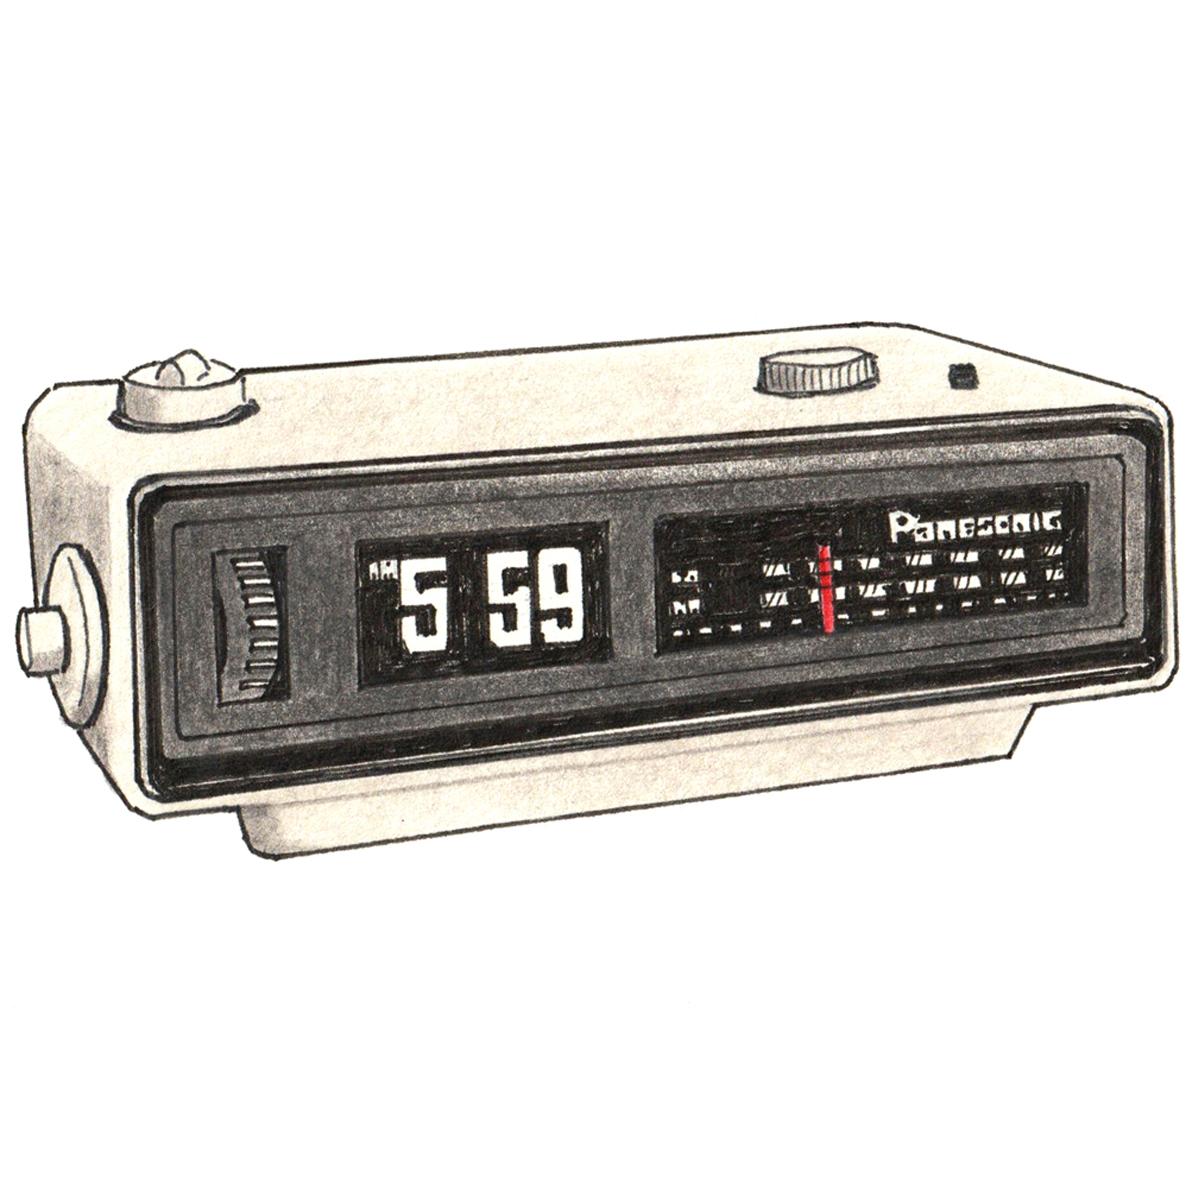 Limited edition print from a pen, ink and coloured pencil drawing of the alarm radio from the film Groundhog Day